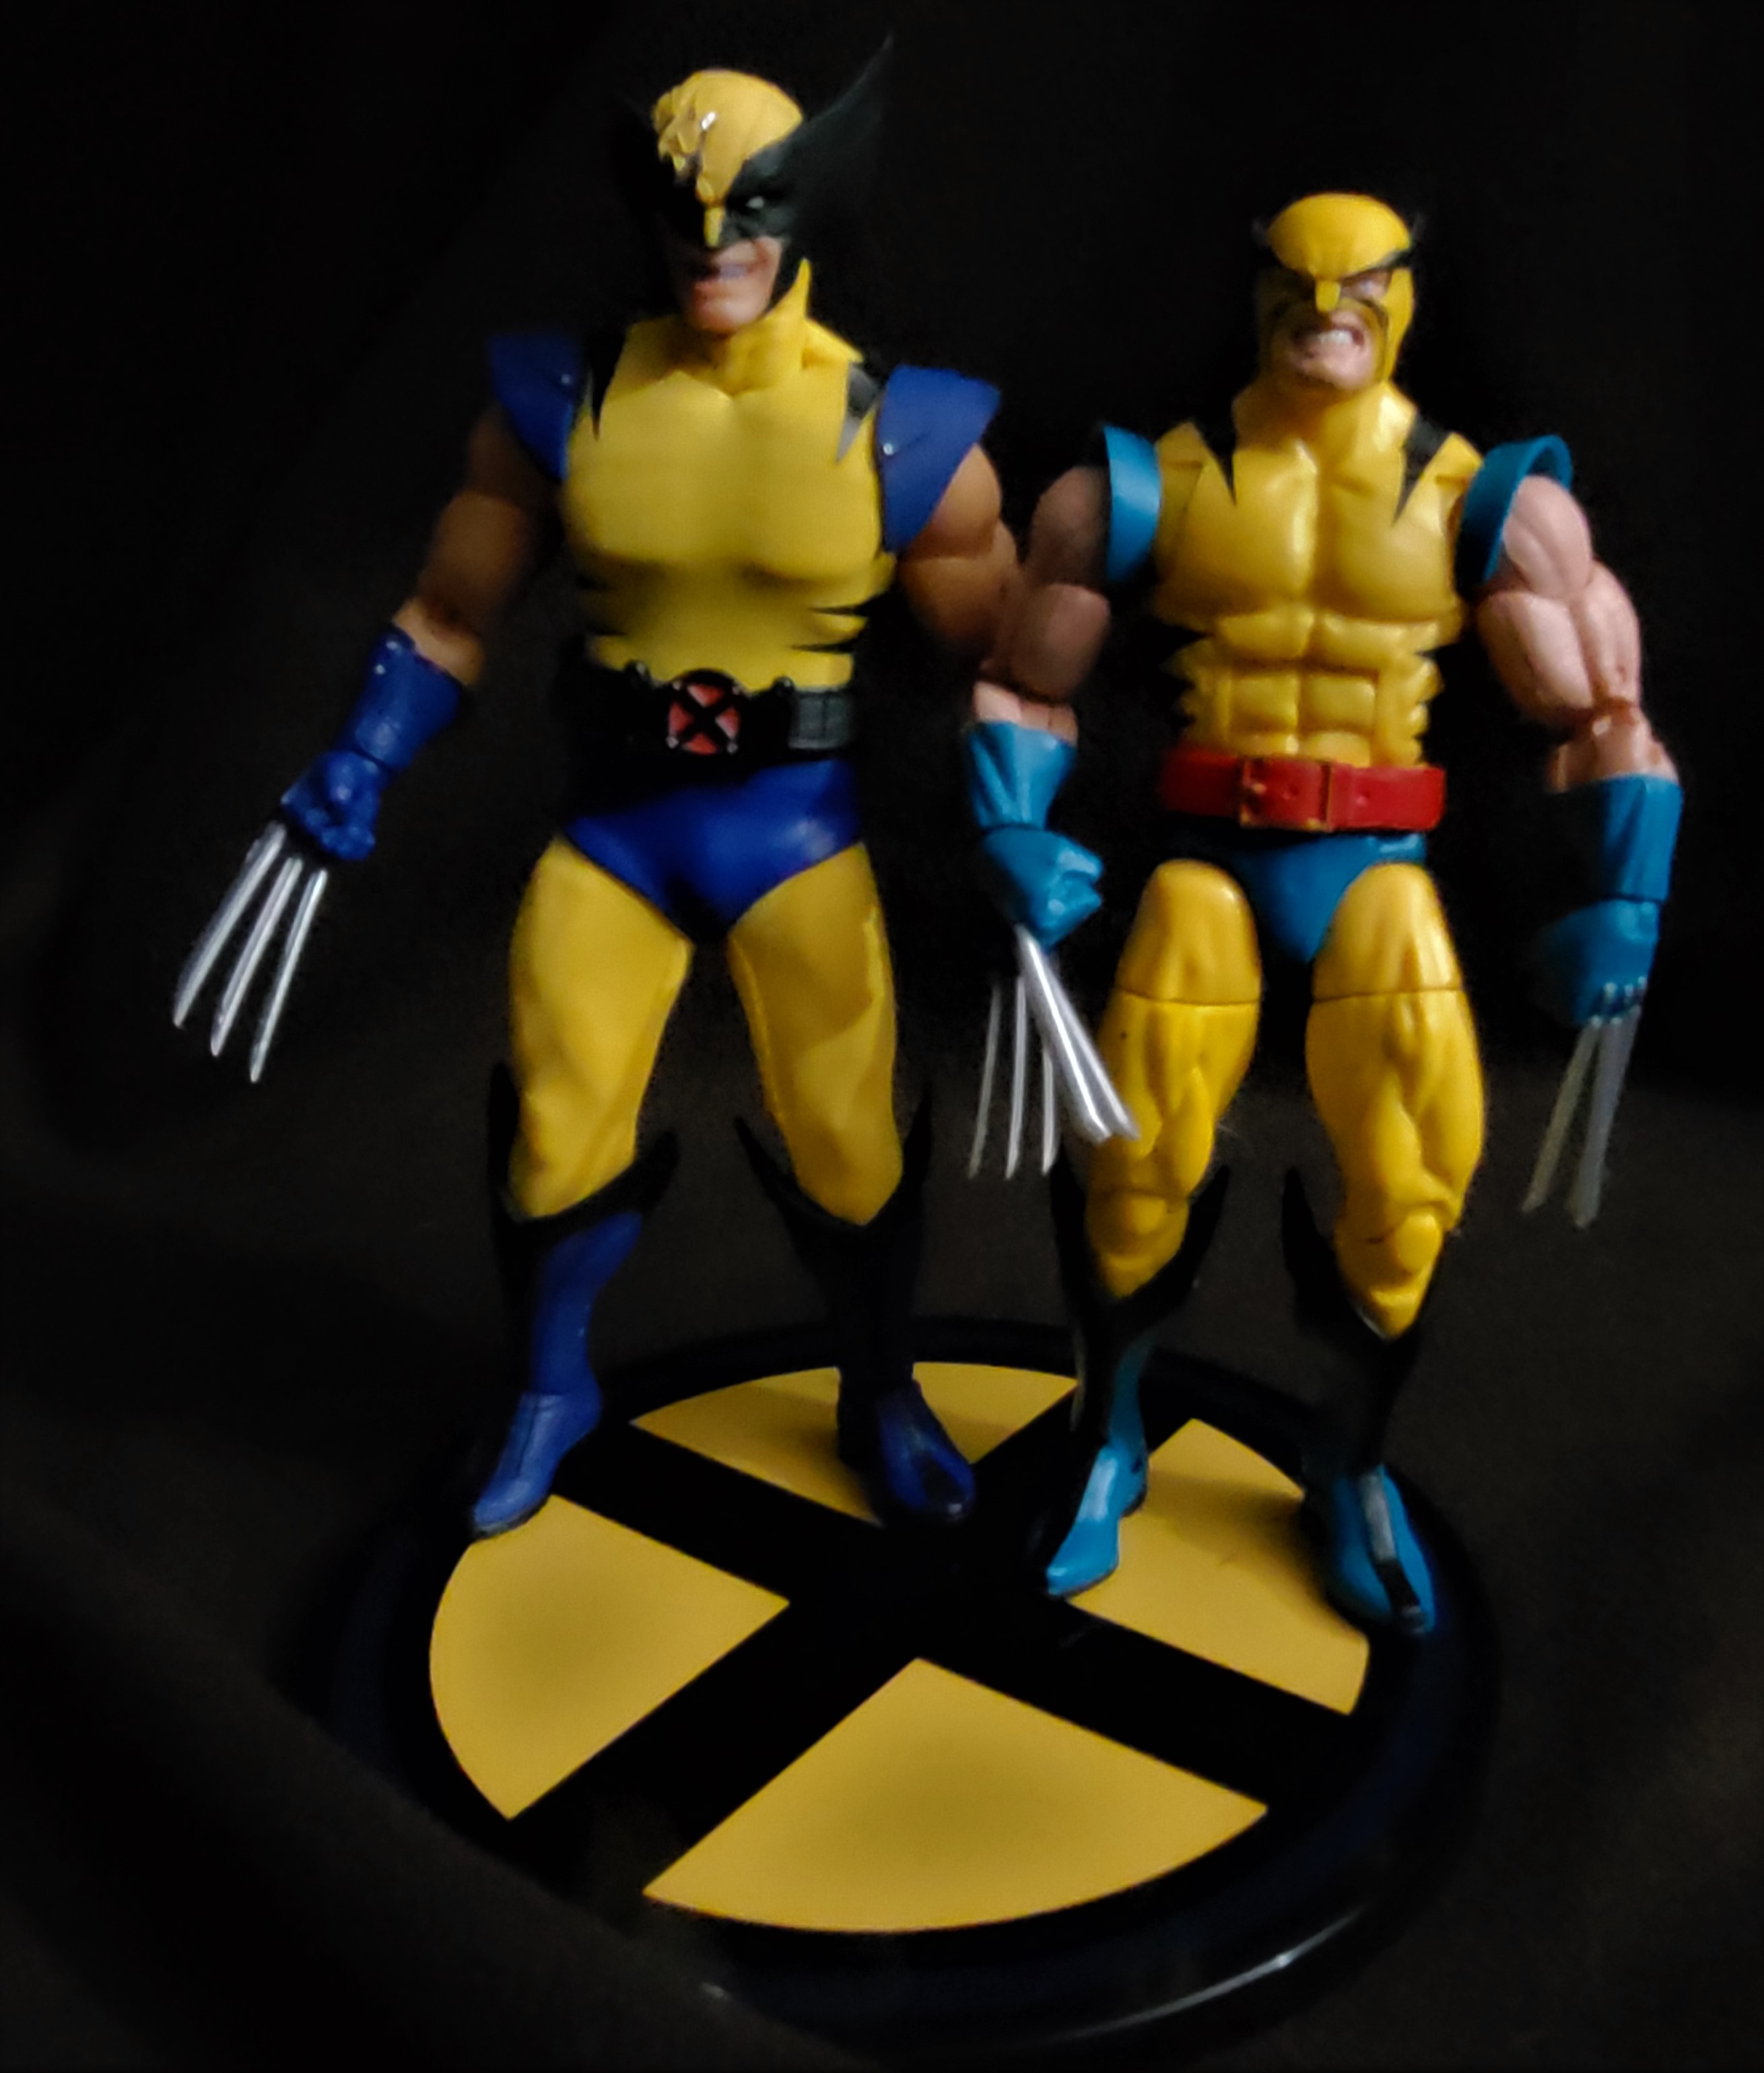 Mezco and Hasbro side-by-side